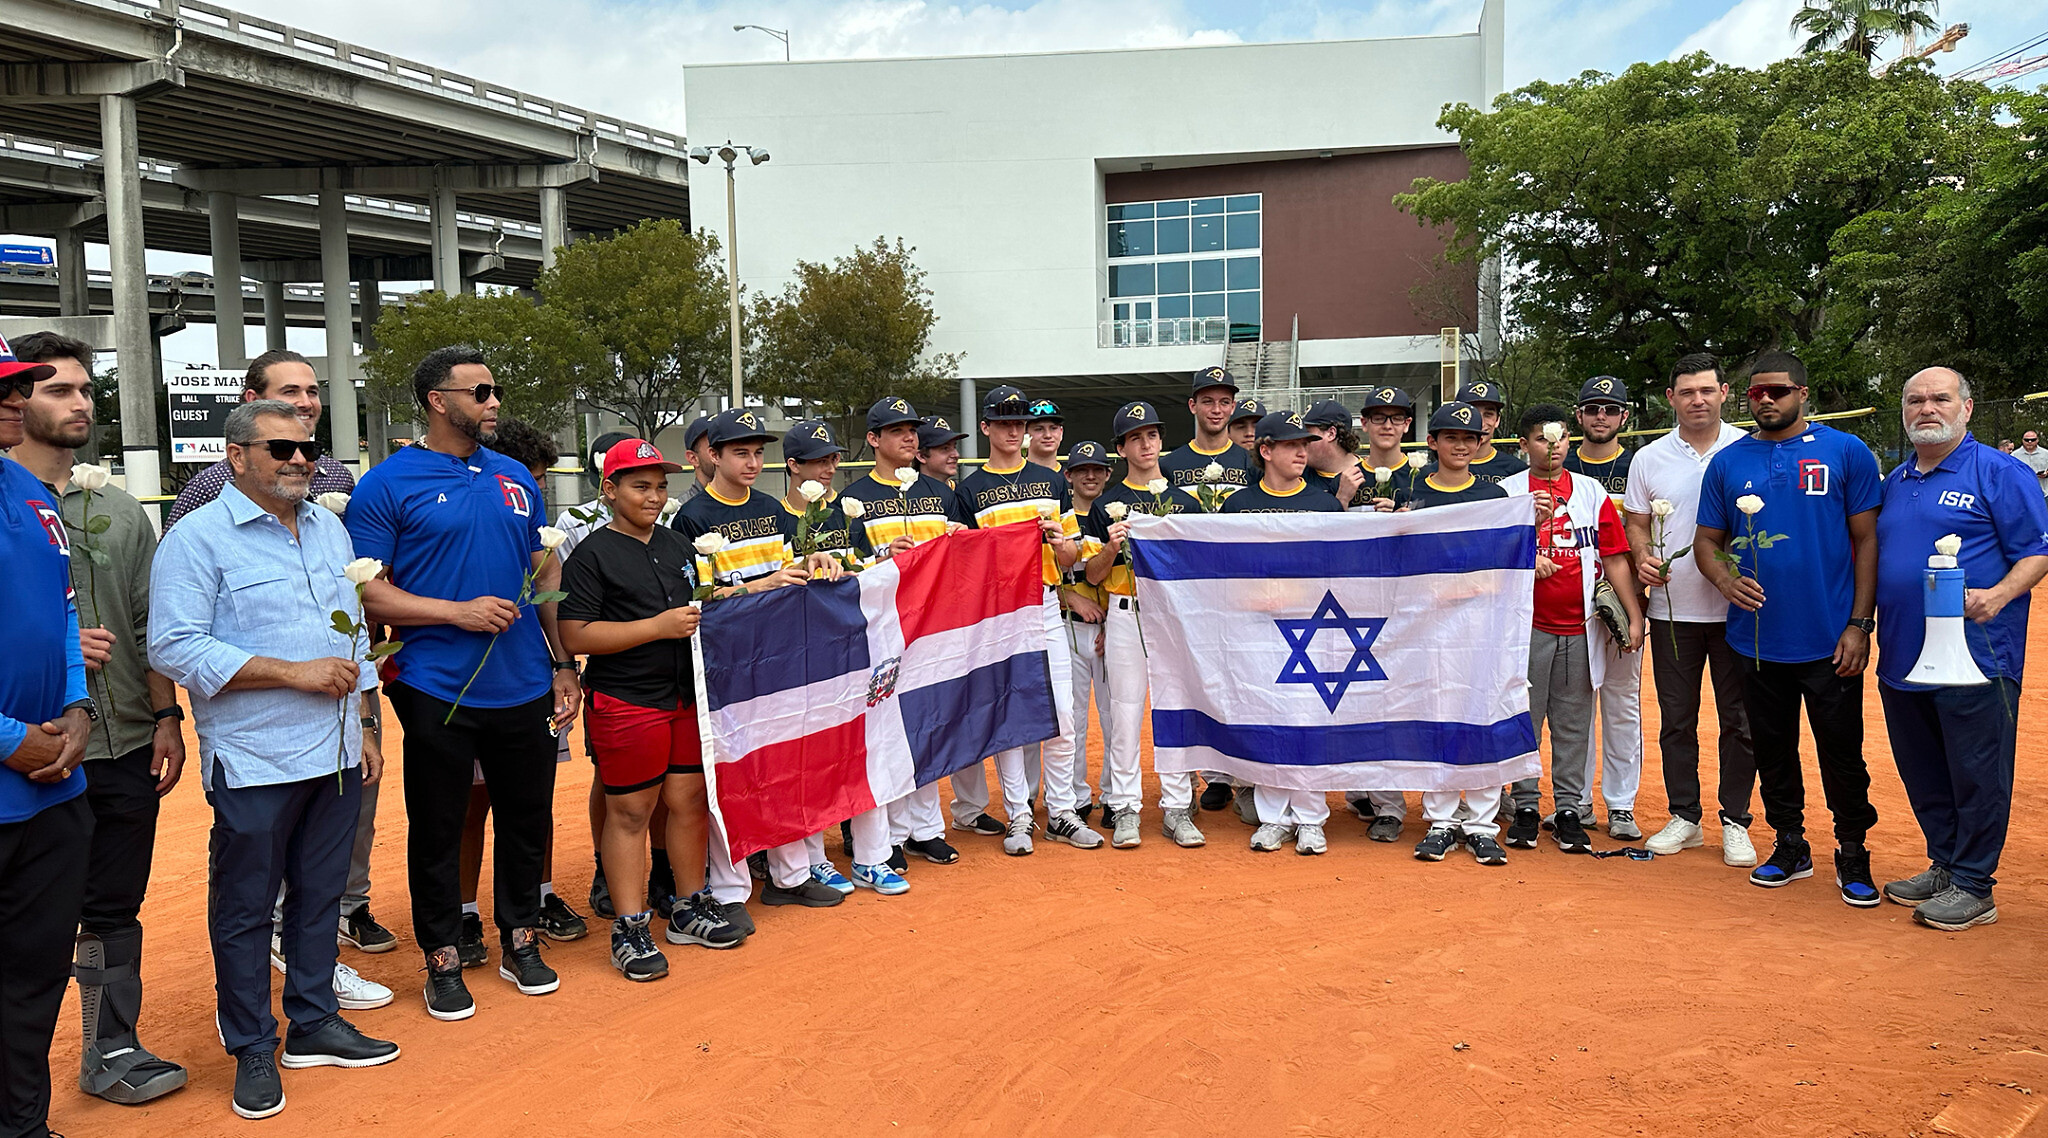 Israeli and Dominican WBC teams promote friendship